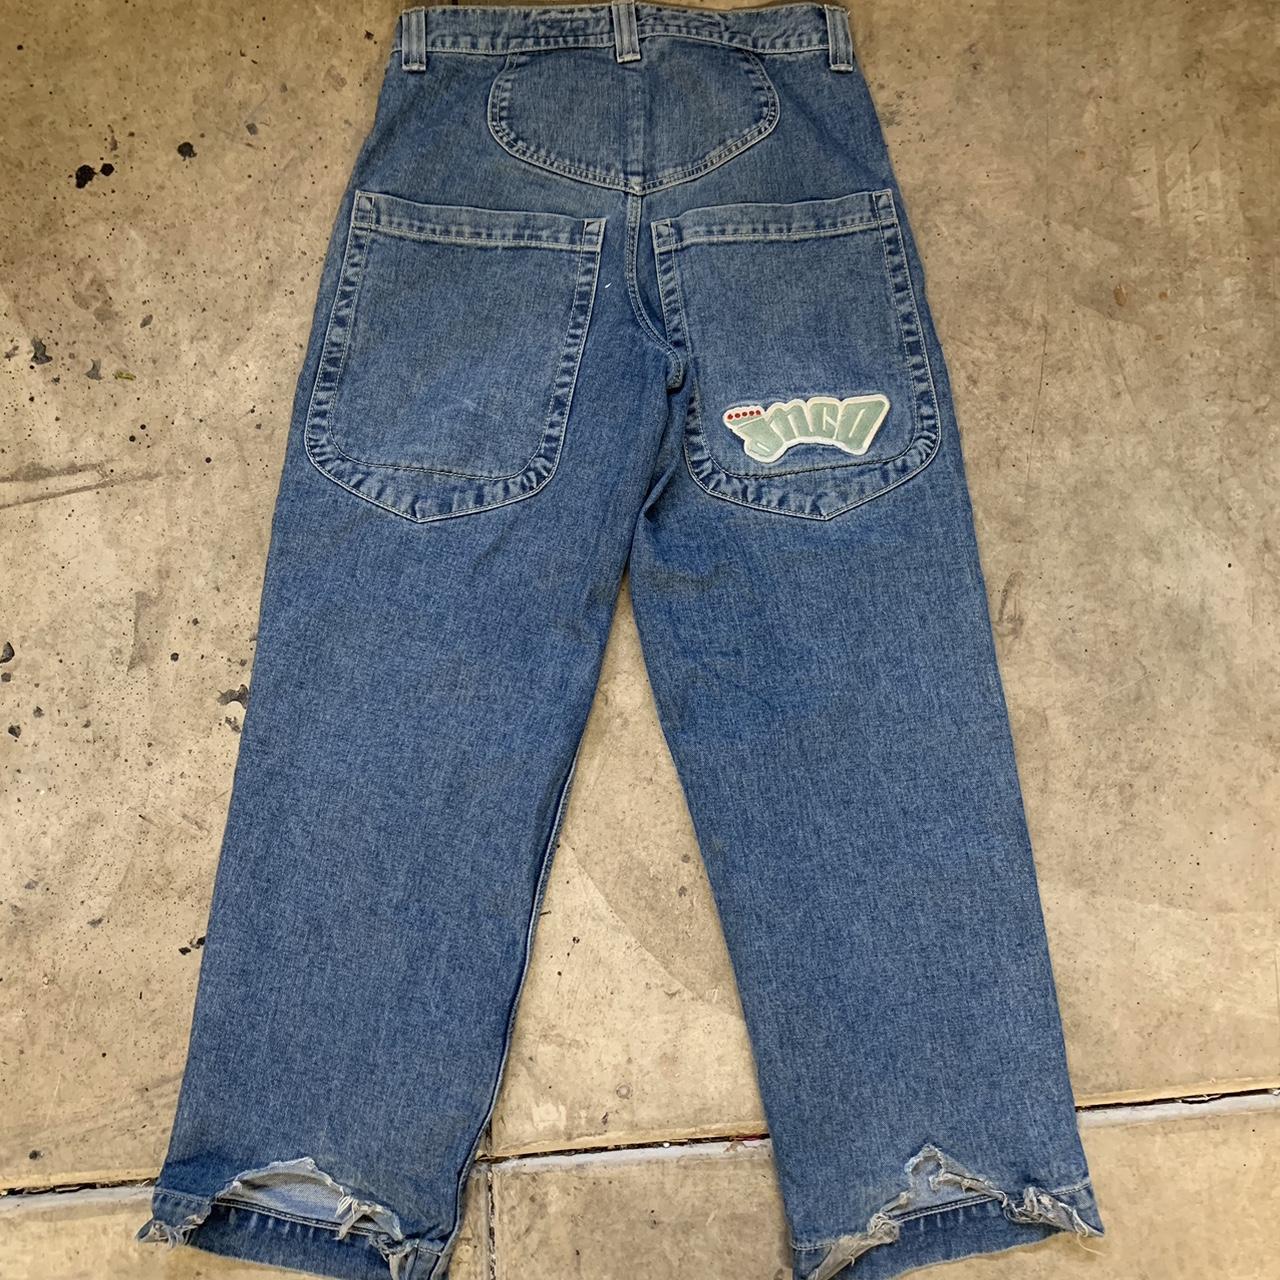 jnco lowdowns 32x32 fit big because they’re... - Depop